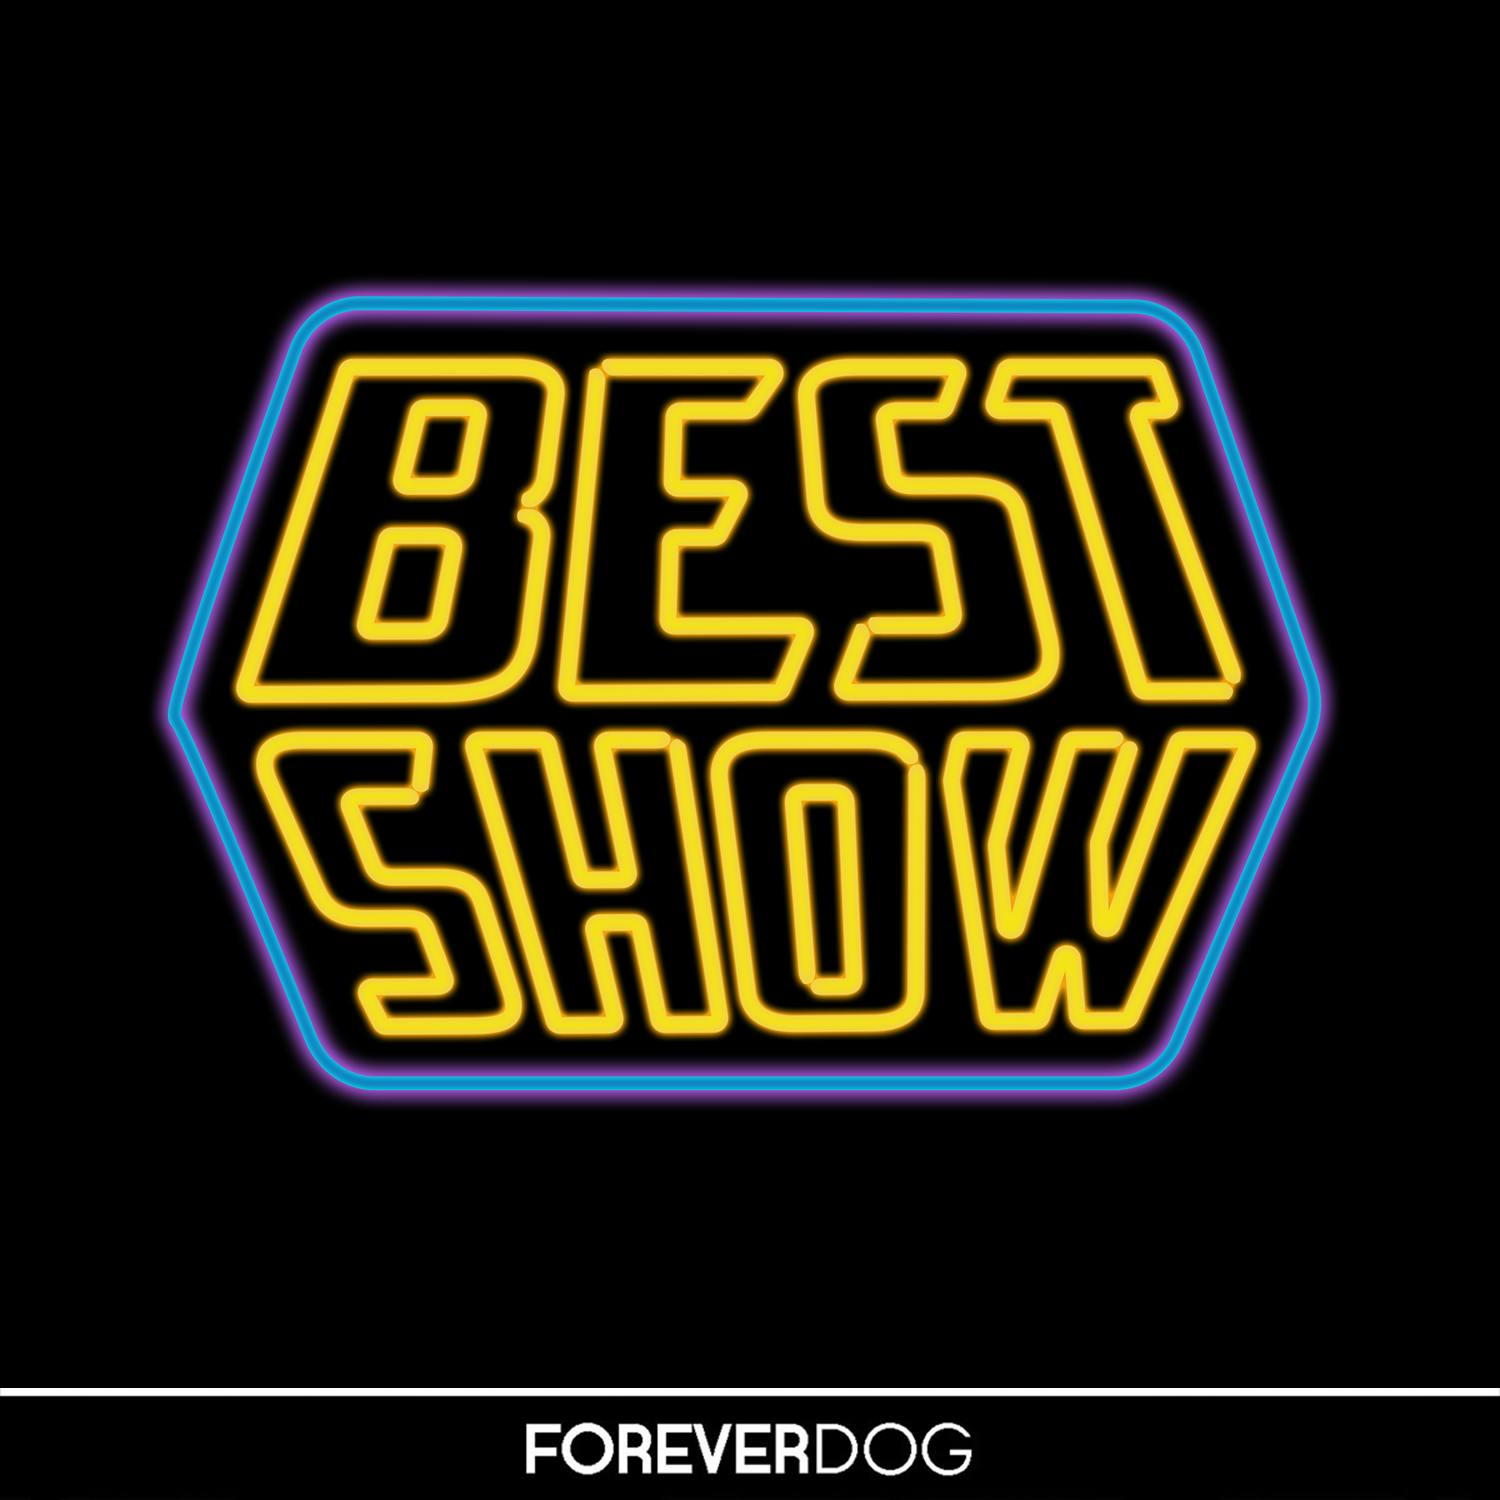 The Best Show with Tom Scharpling podcast show image